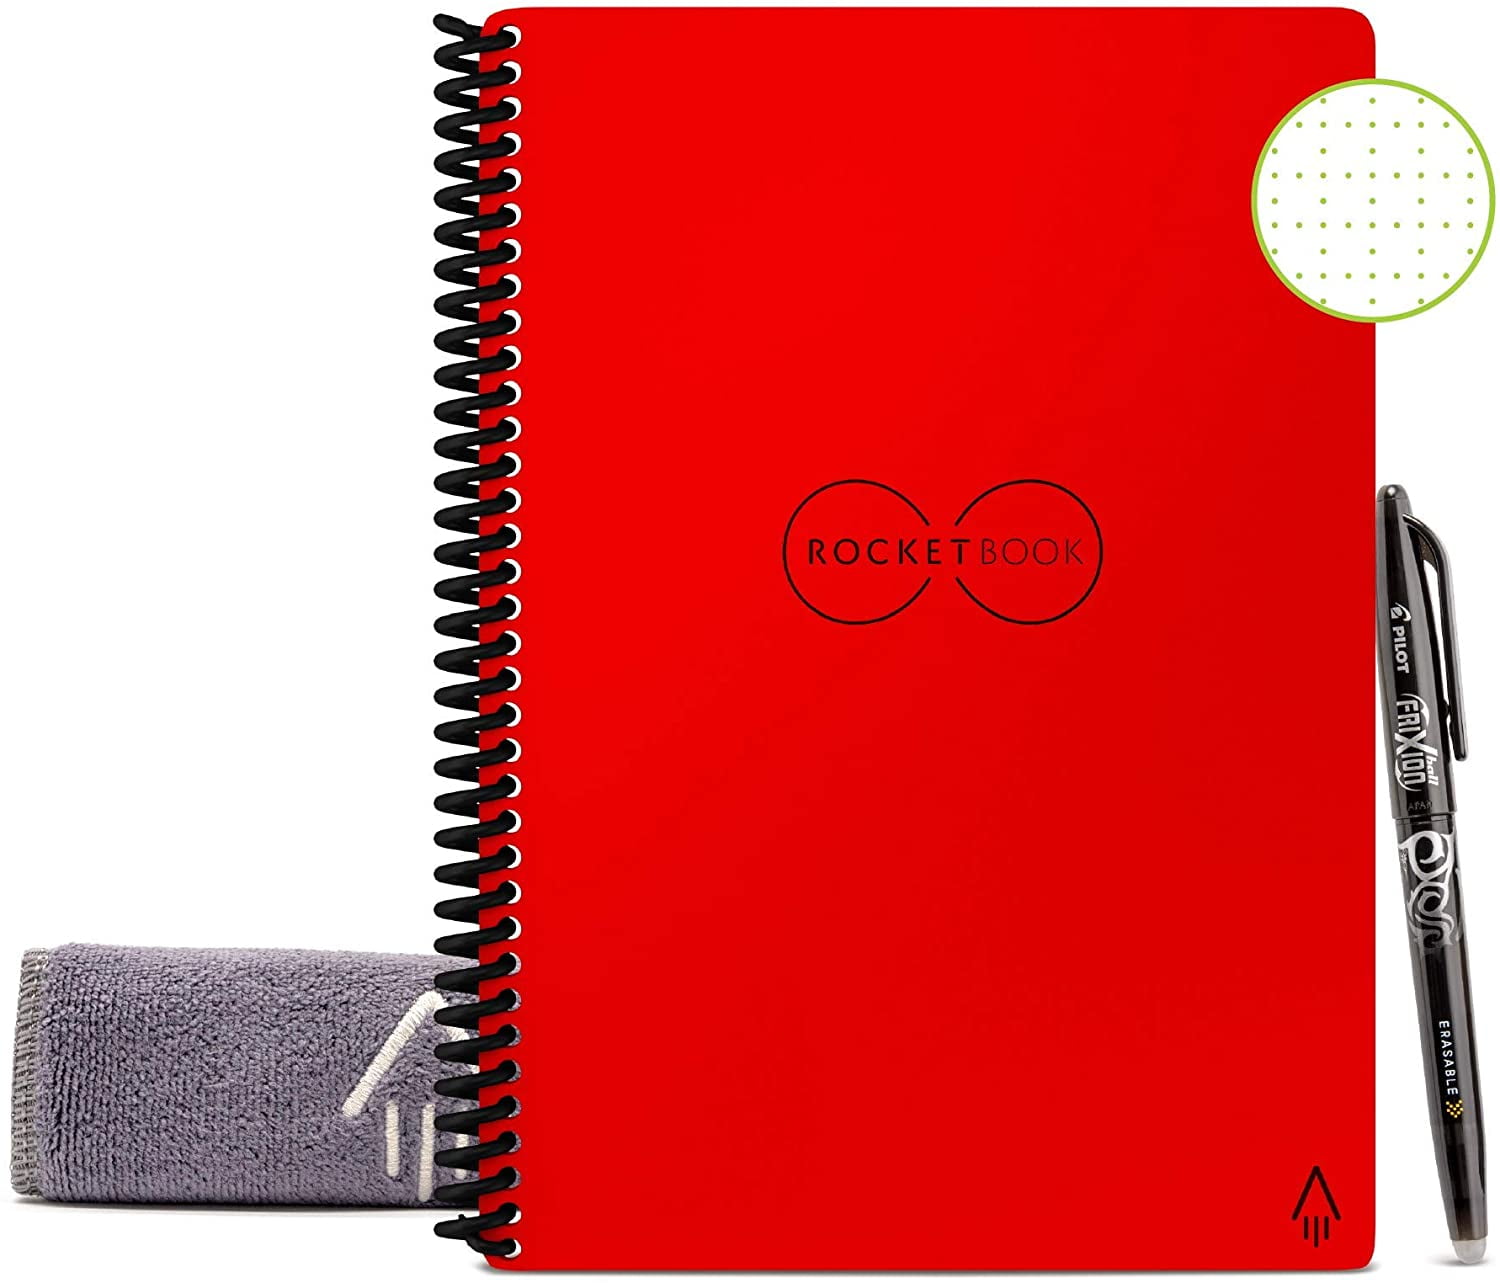 Smart Reusable Notebook with 1 Frixion Pen and 1 Microfiber Cloth Included Beacon Orange Cover 6 x 8.8 Inches Executive Size